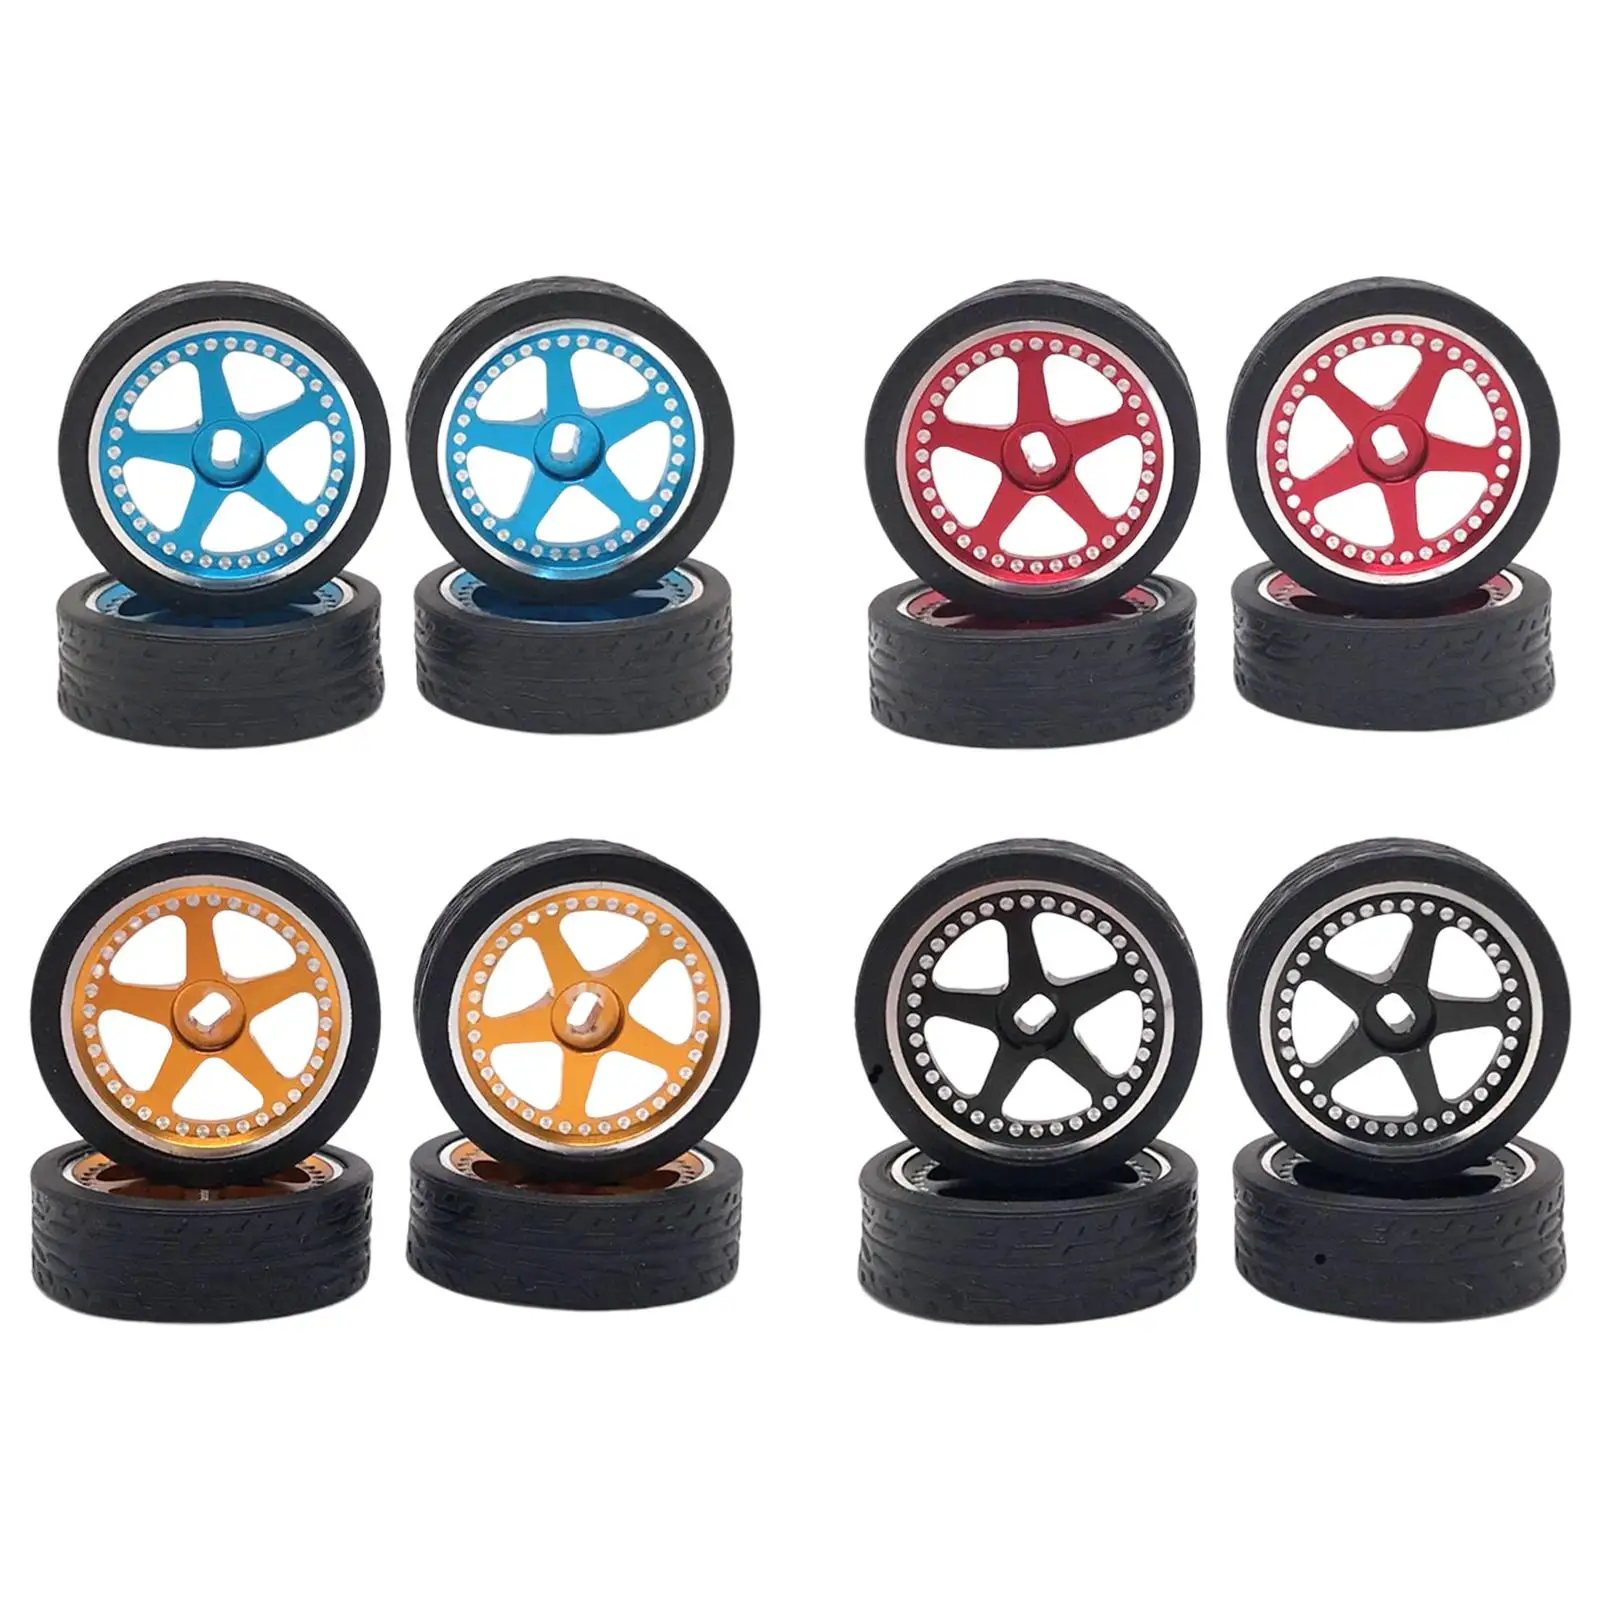 1:28 RC Wheel Hub Plastic RC Car Spare Parts Replacement Universal Metal 4Pcs for Wltoys DIY Accs RC Hobby Car Parts Model Buggy